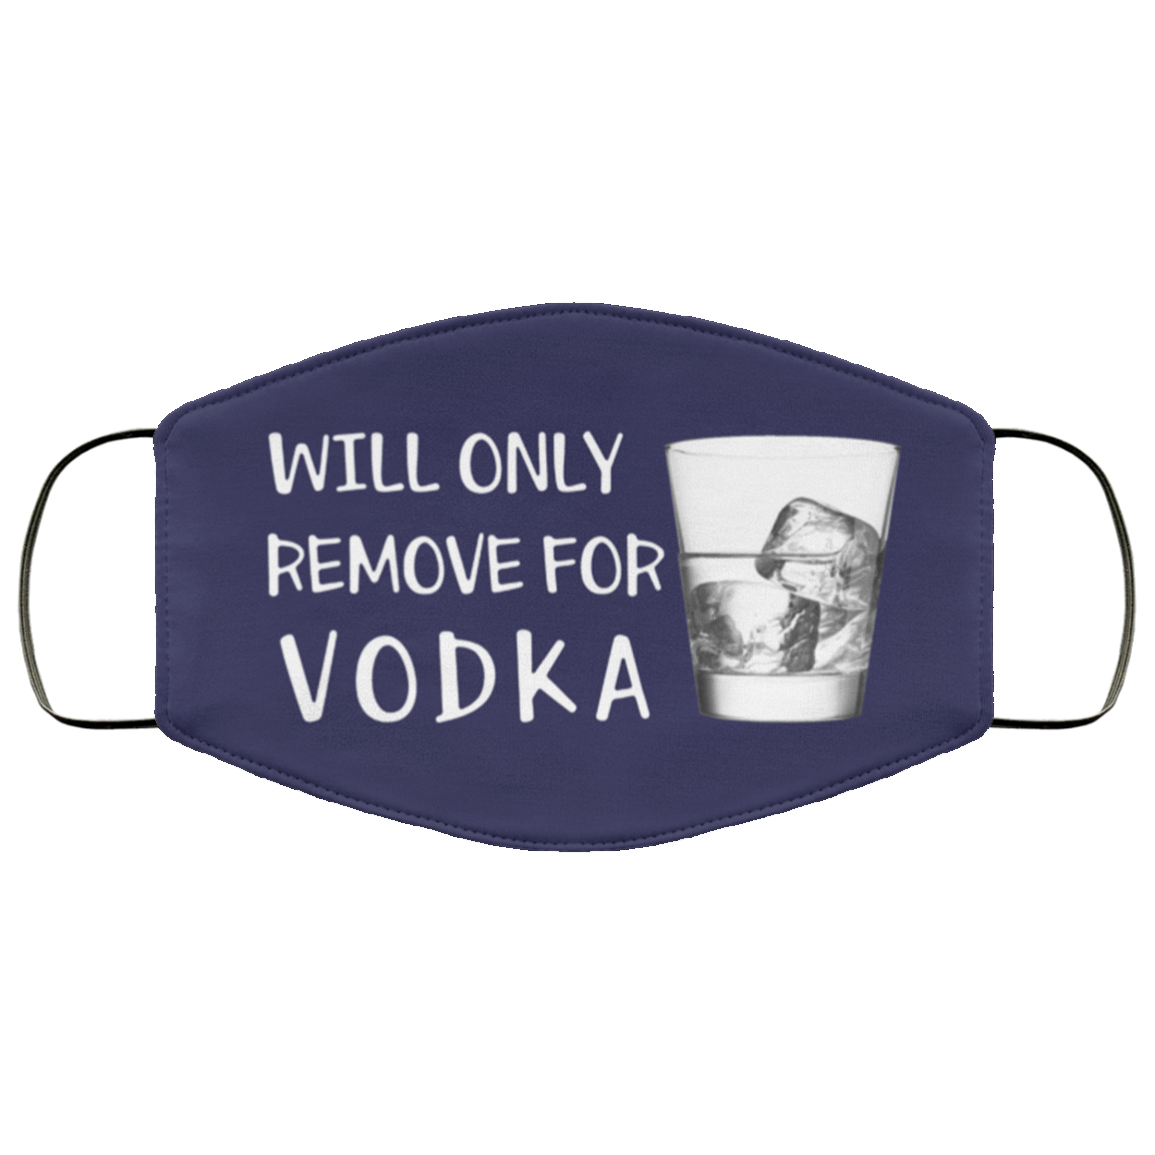 Will Only Remove For Vodka Face Mask